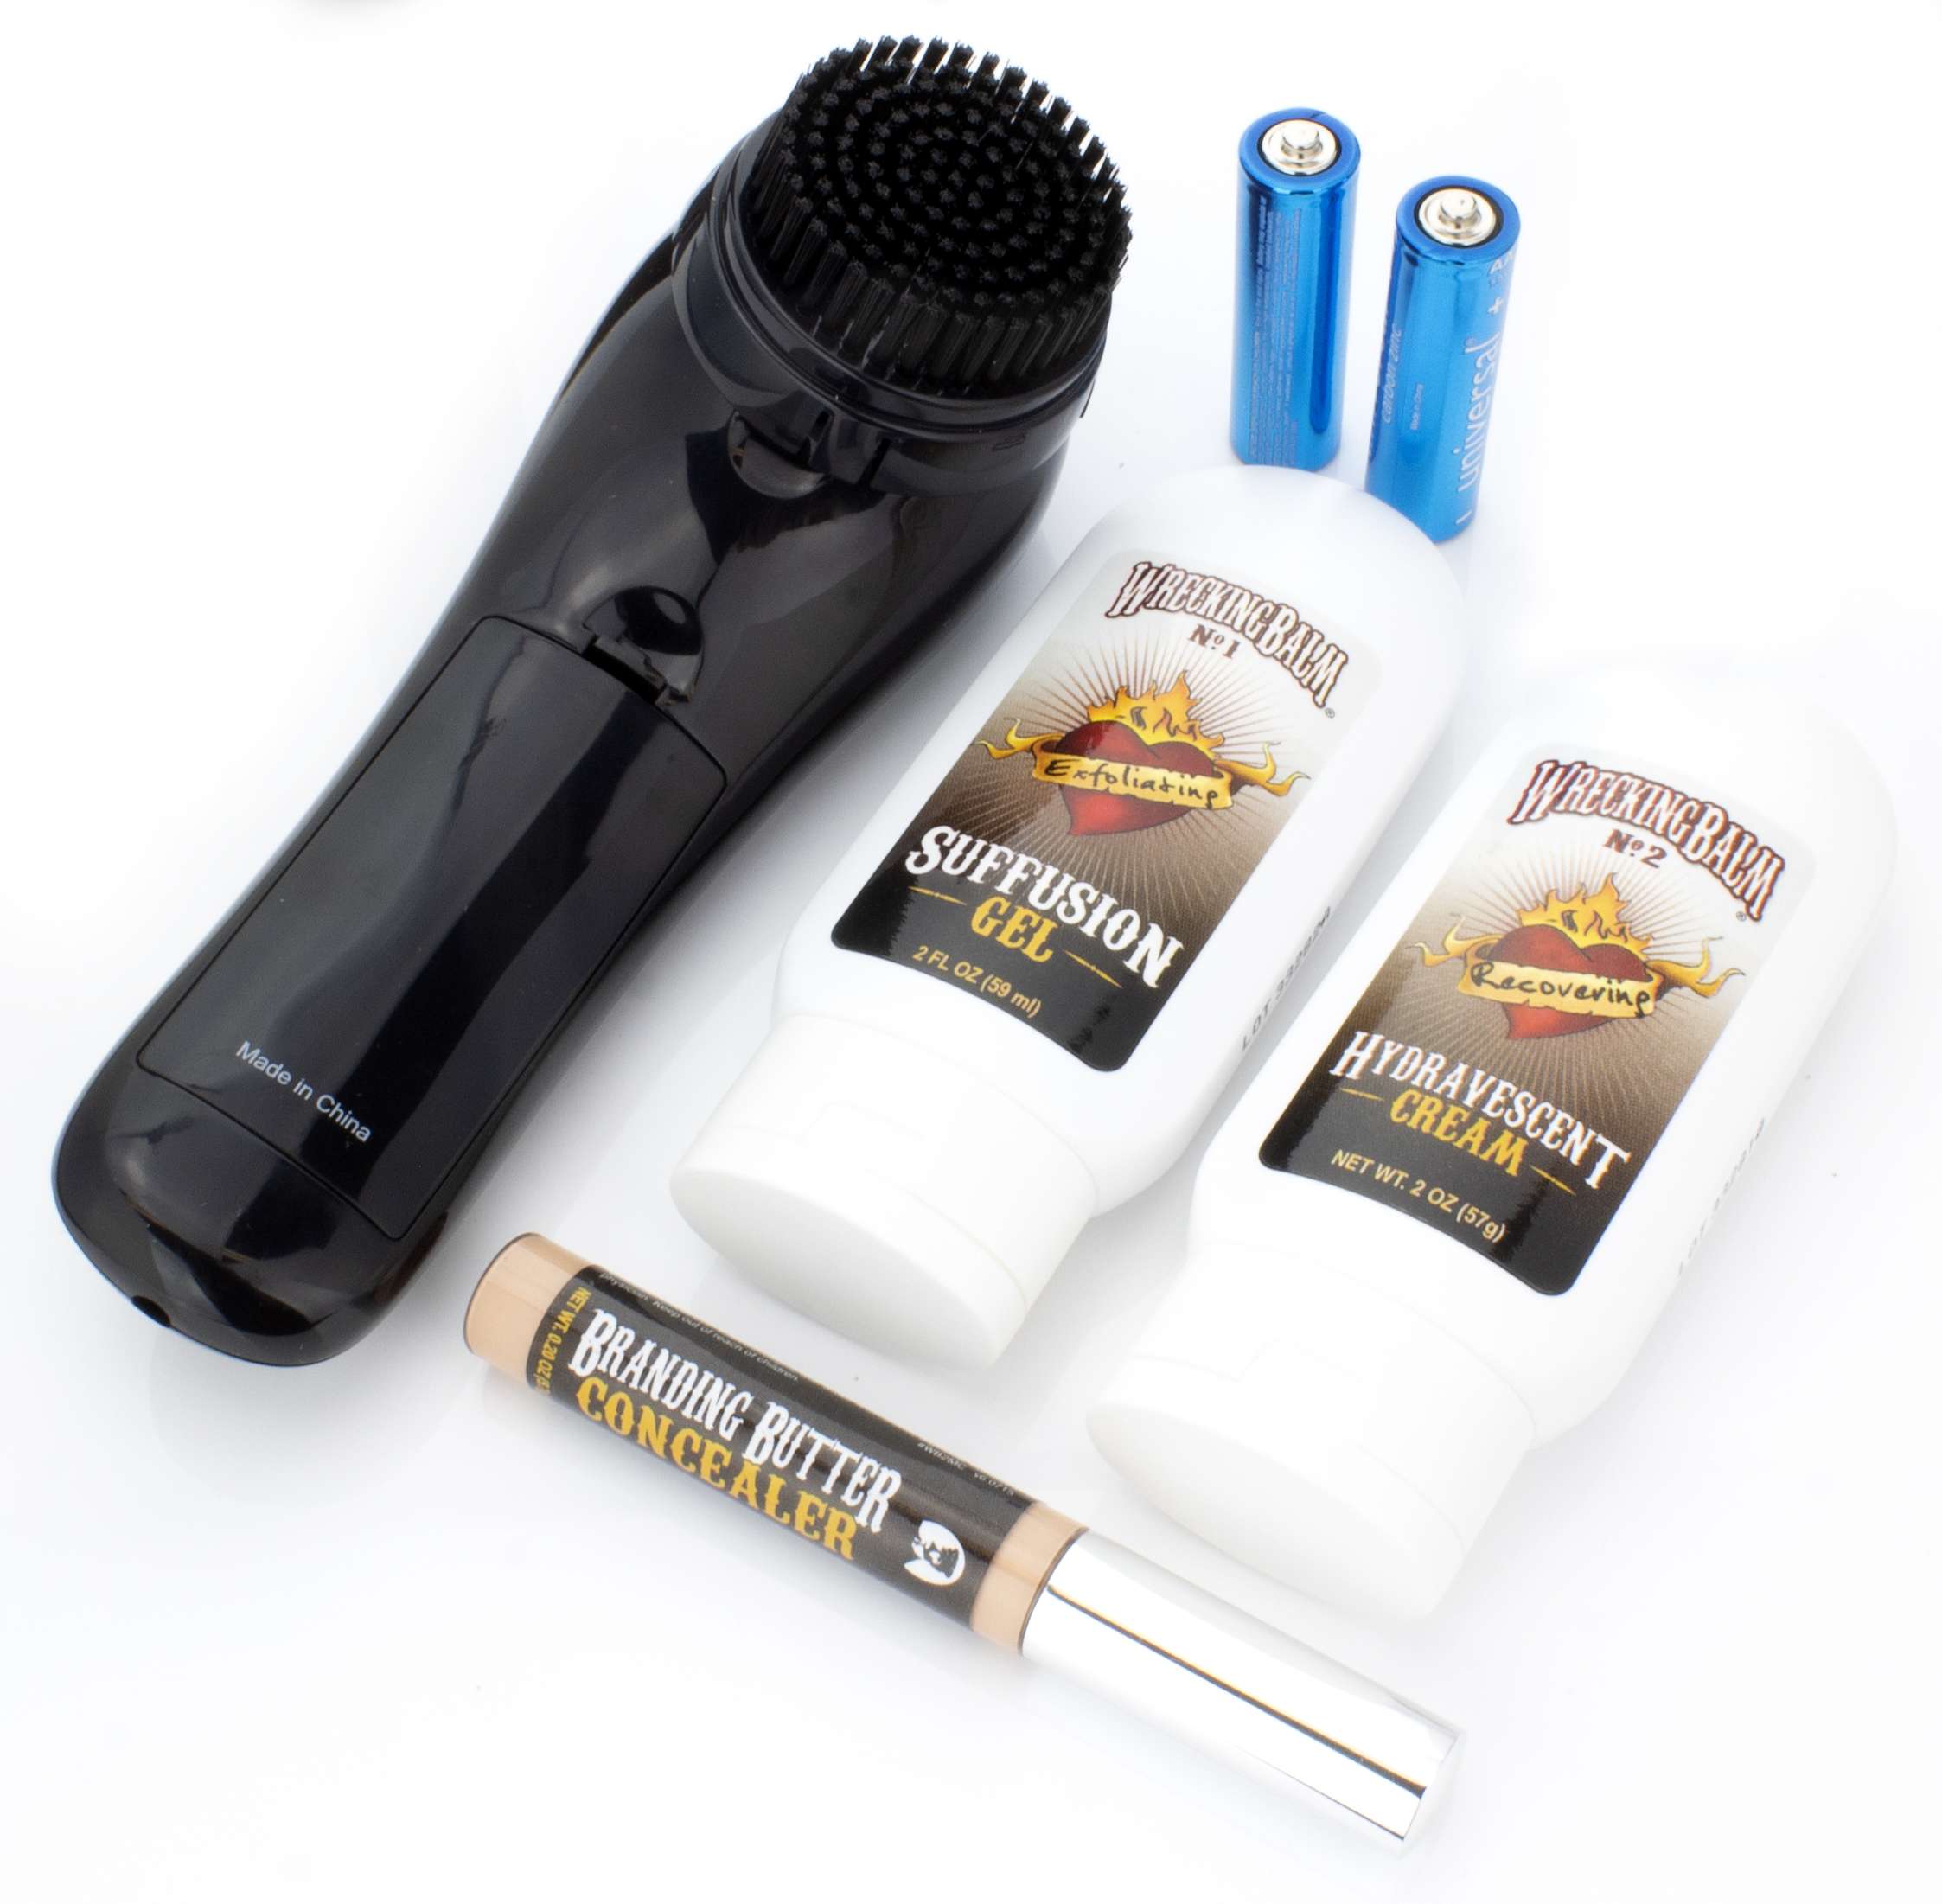 Wrecking Balm Tattoo Removal System to Fade Tattoos At ...